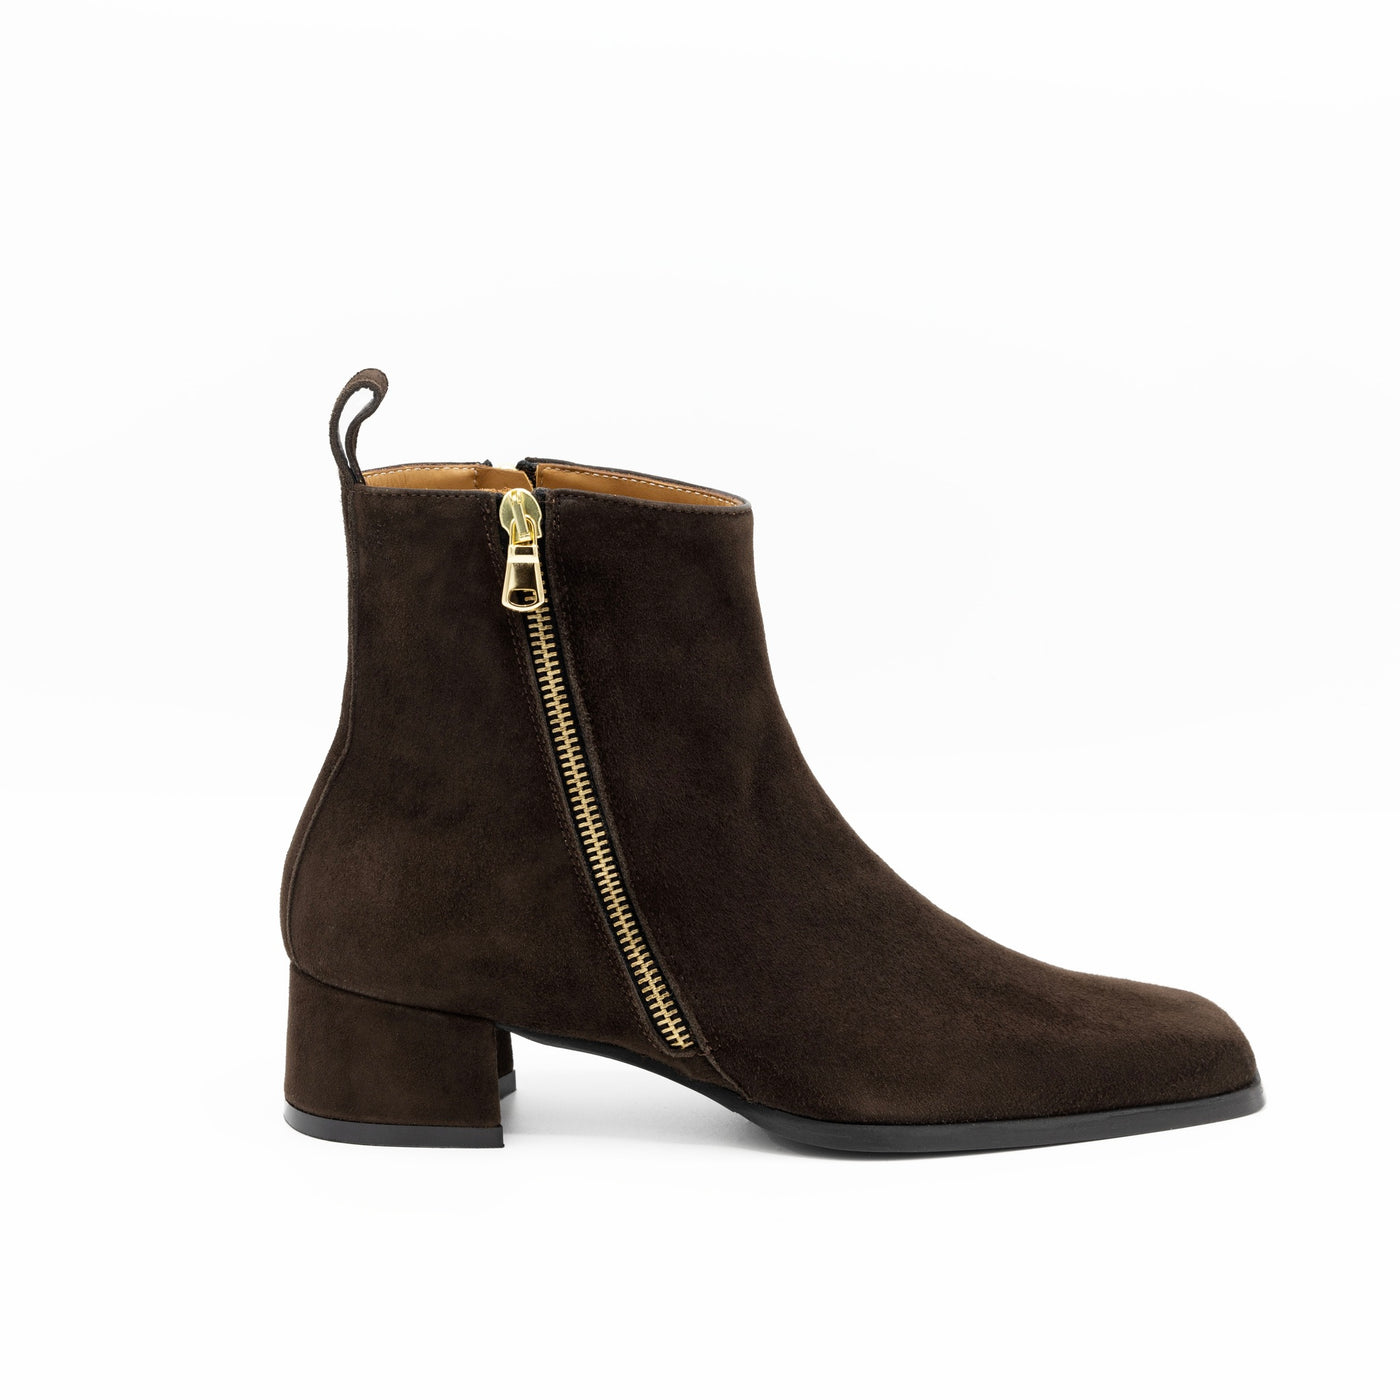 The Alice Boots in Brown Suede